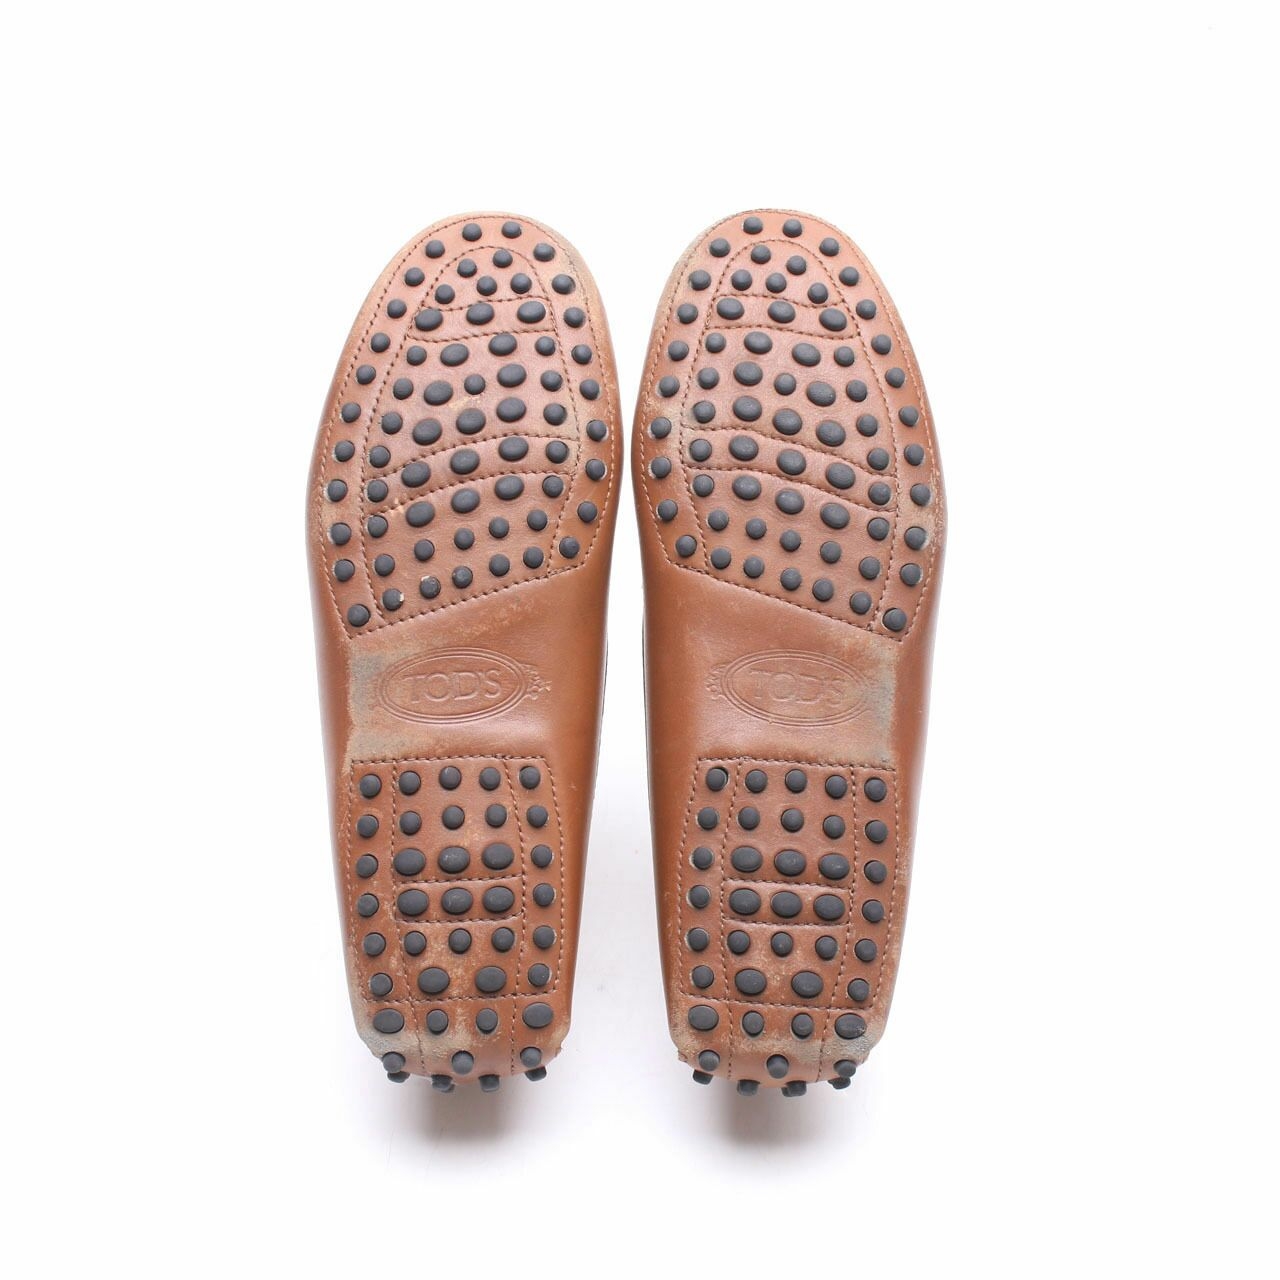 Tod's Gommini Leather Tan Loafers